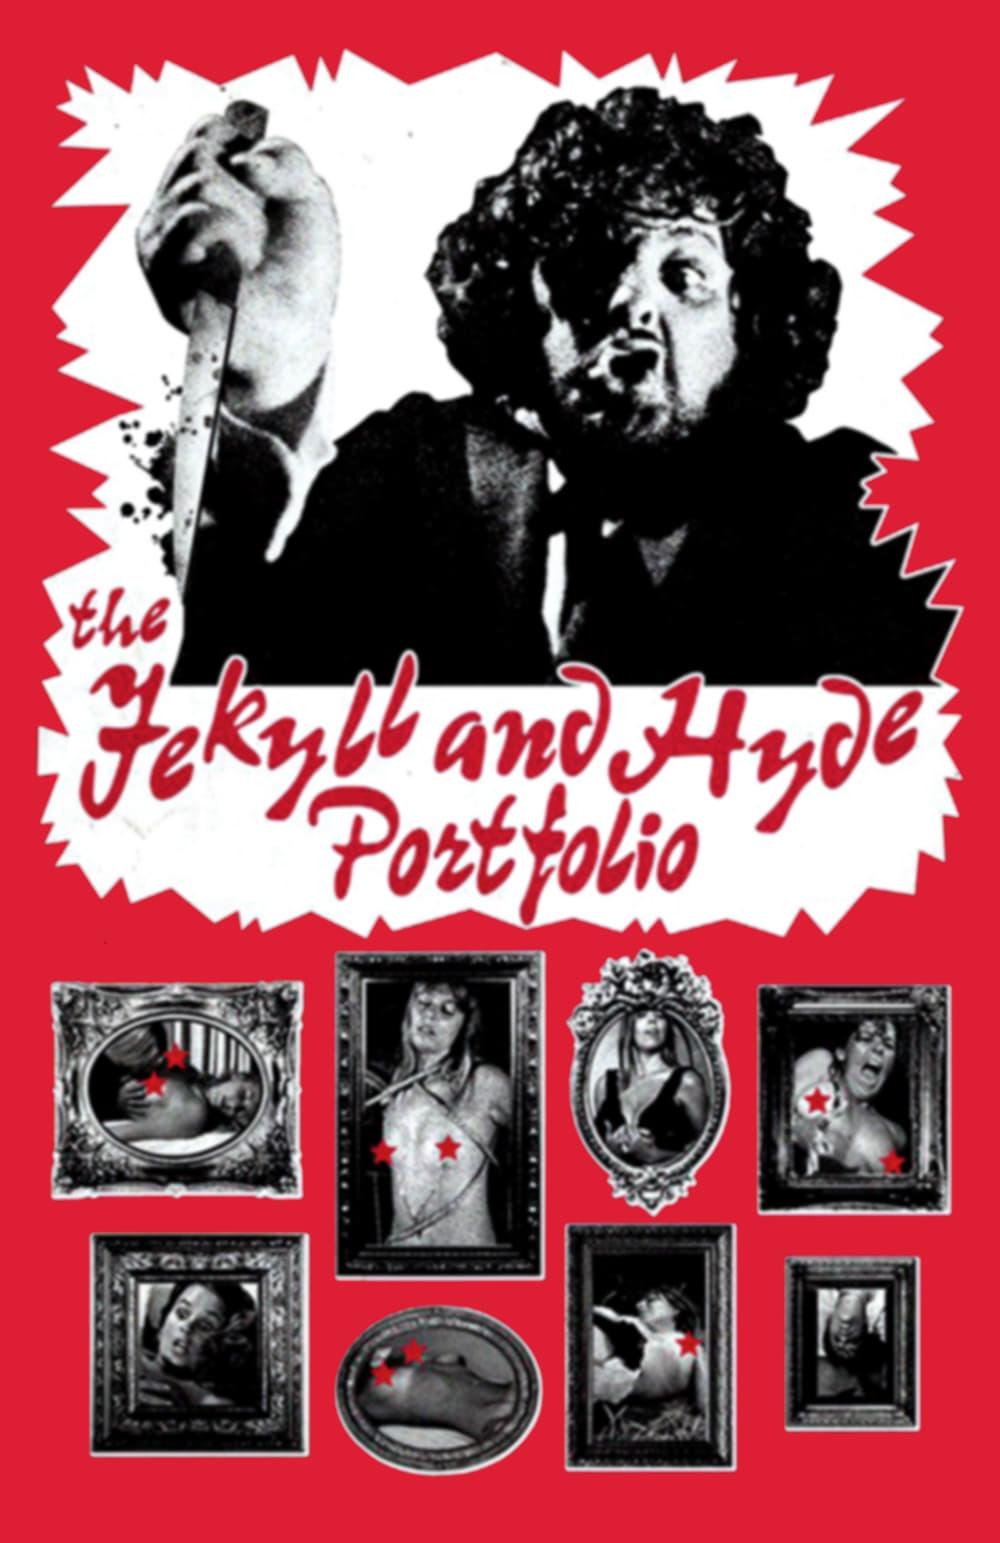 The Jekyll and Hyde Portfolio poster